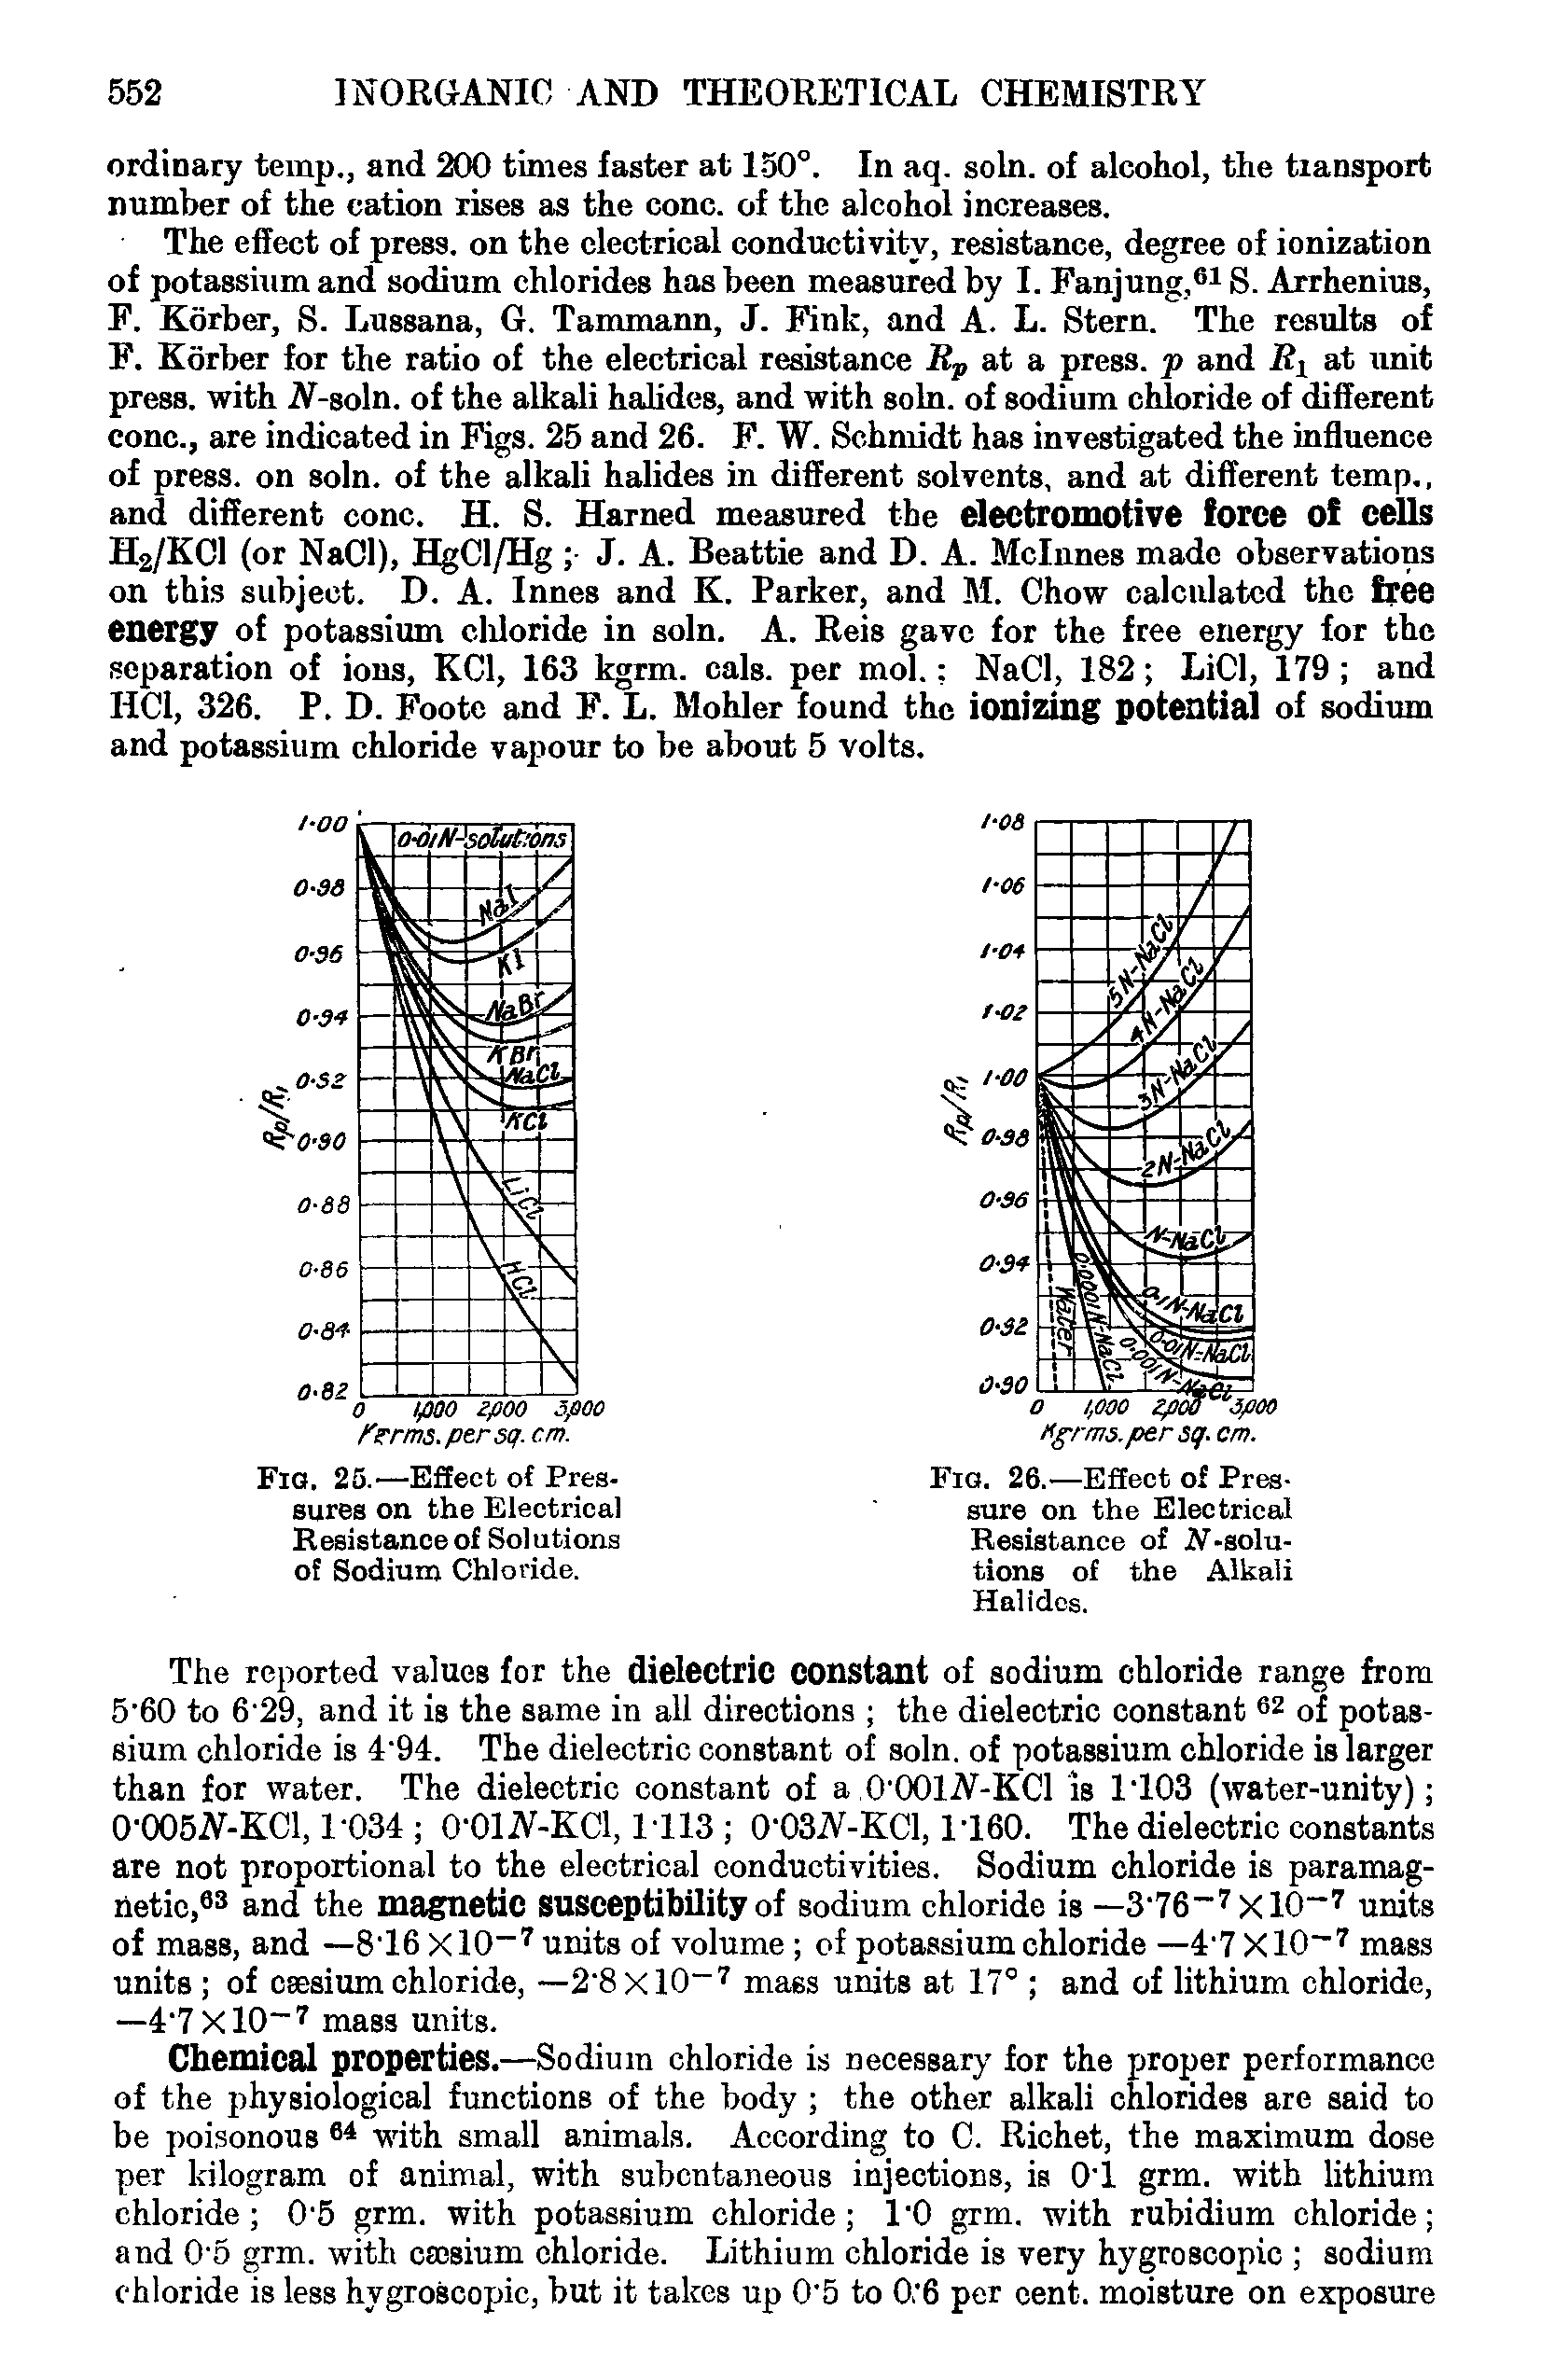 Fig. 25.—Effect of Pressures on the Electrical Resistance of Solutions of Sodium Chloride.